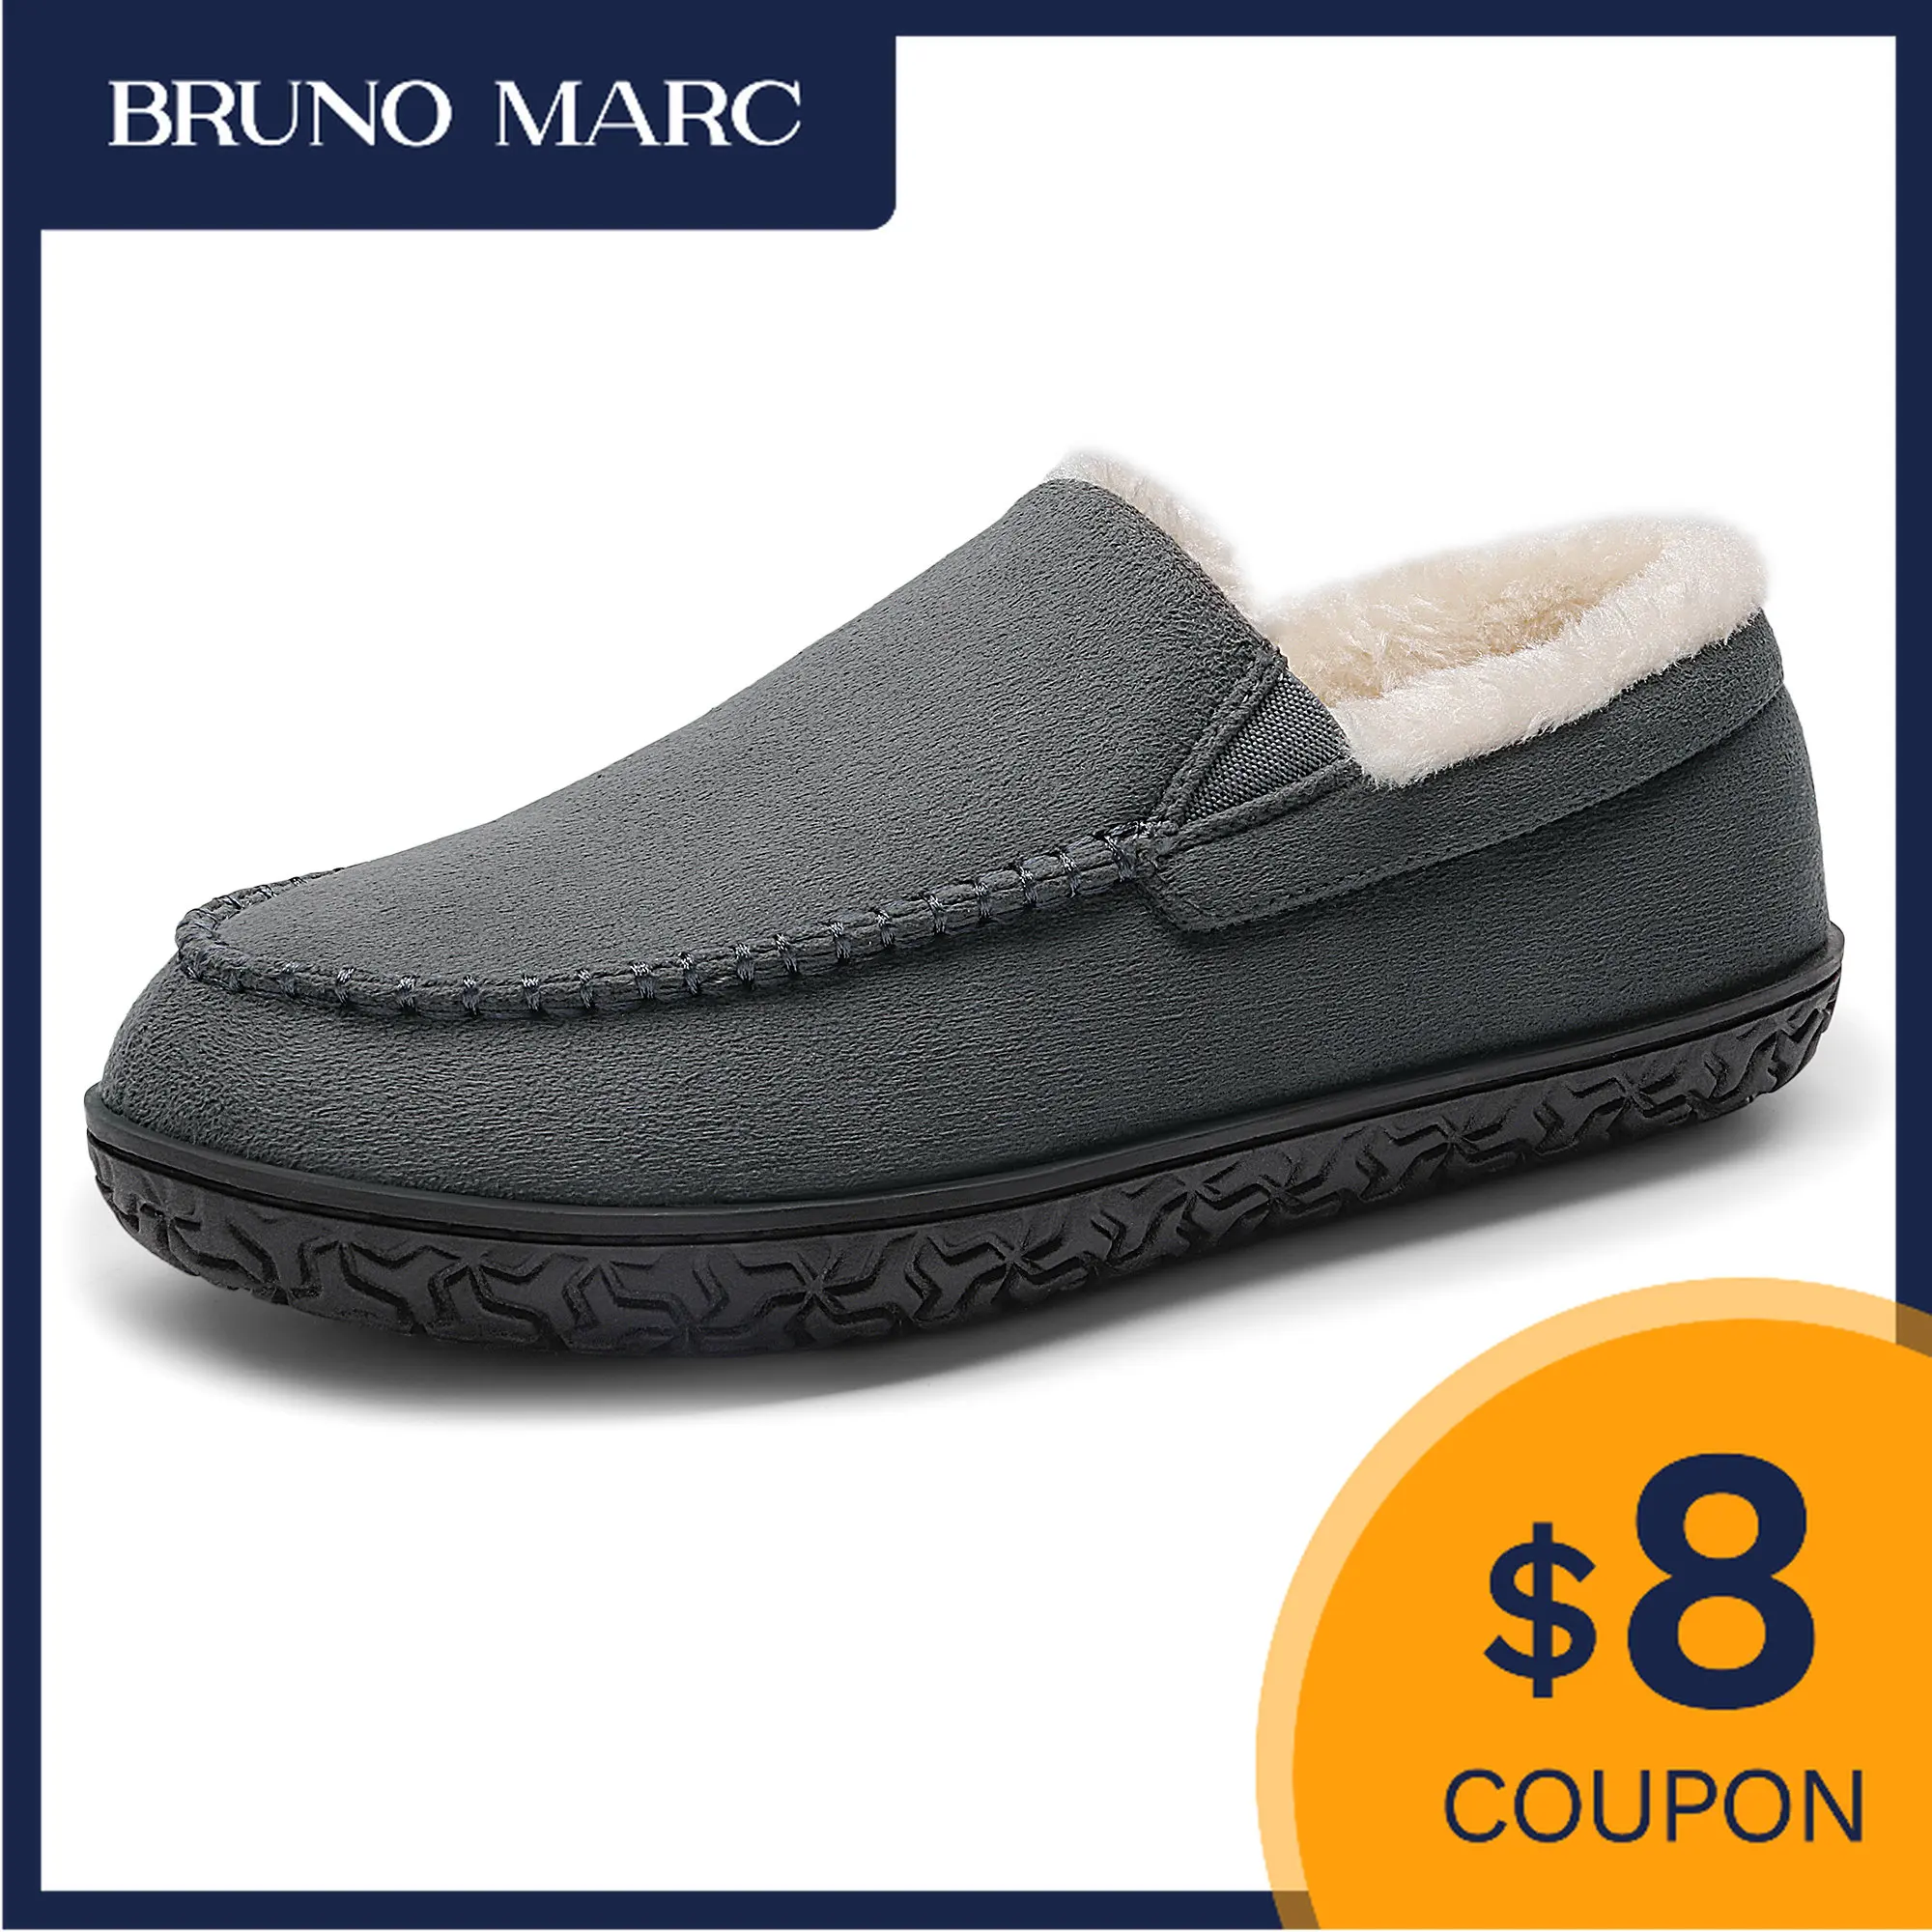 

Bruno Marc Men's Winter Slippers Loafers House Warm Sneakers Indoor Outdoor Slip-On Fuzzy Anti-Slip Shoes Room Slippers for Men